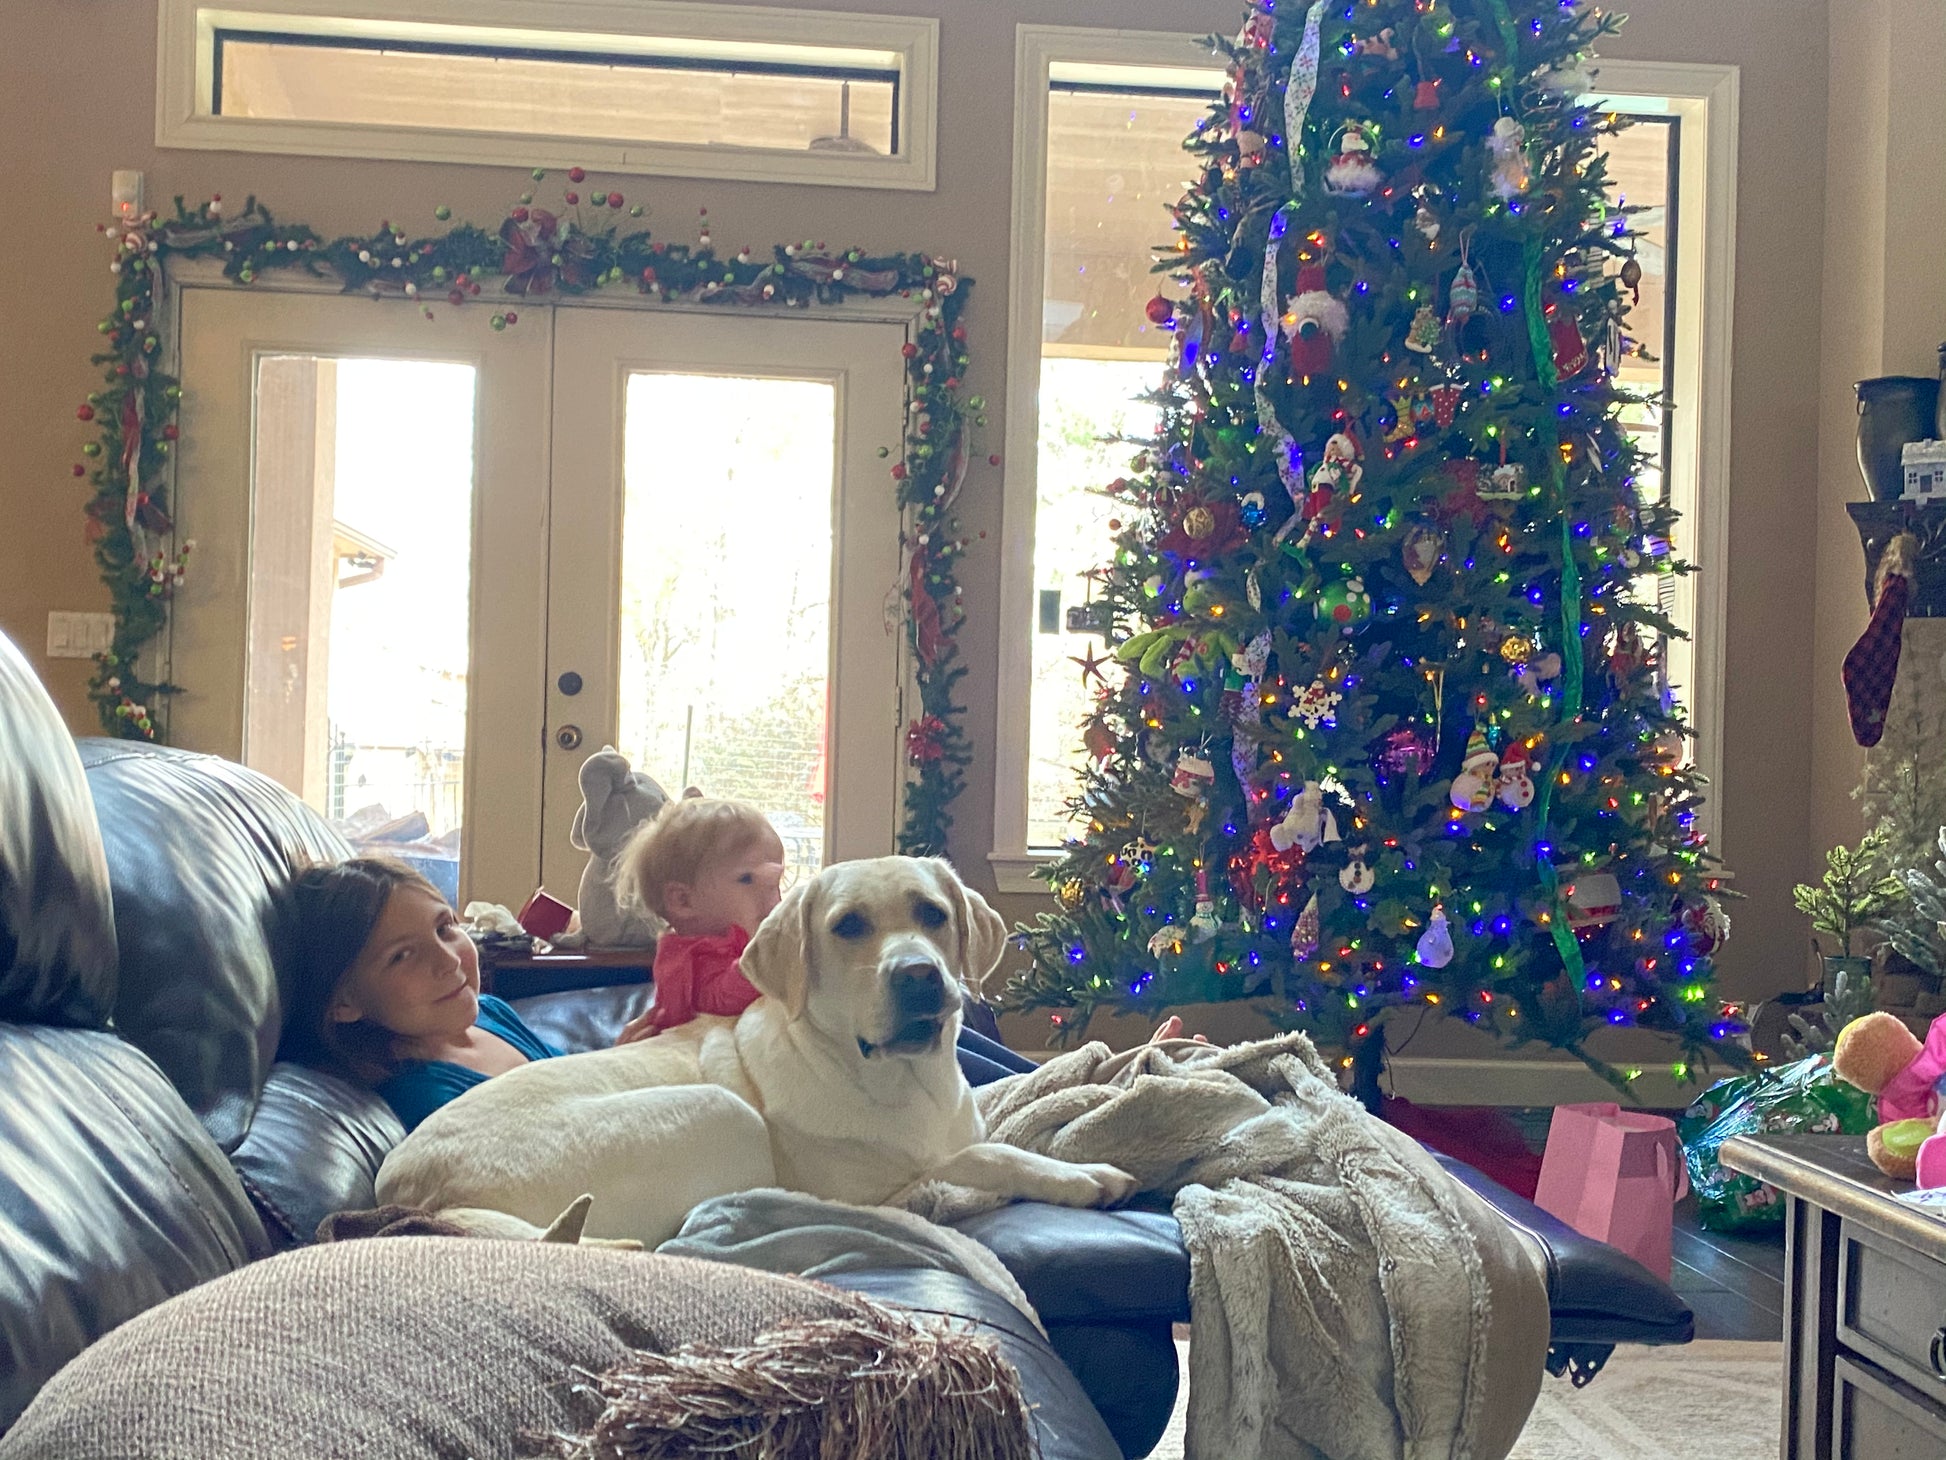 white Labrador breeder dog Aspyn lounging with the grand kids